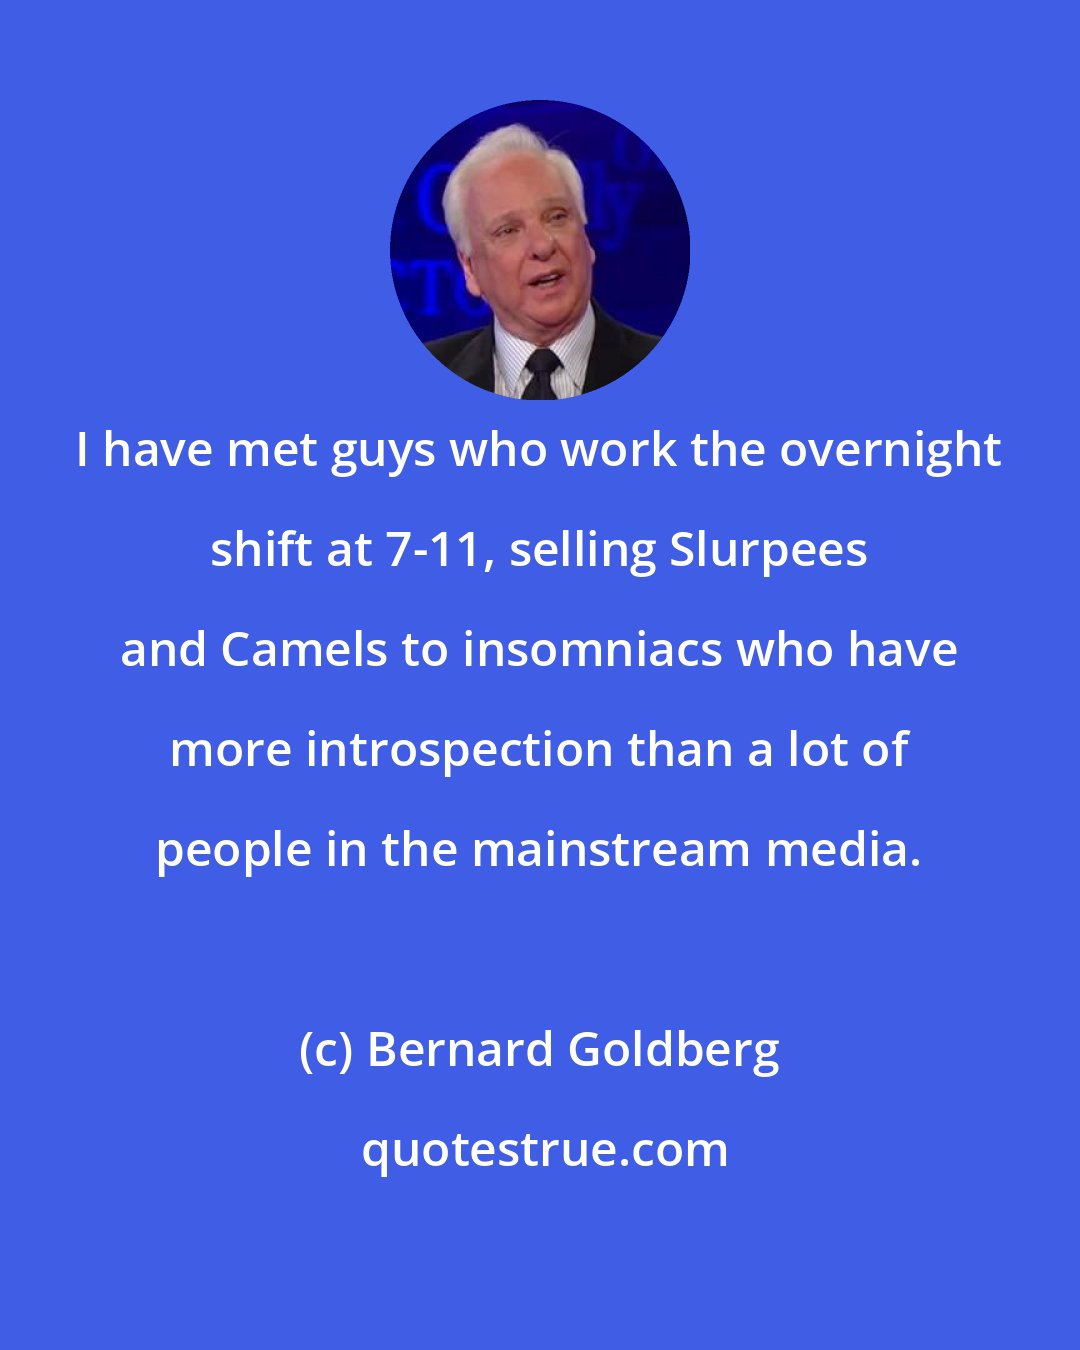 Bernard Goldberg: I have met guys who work the overnight shift at 7-11, selling Slurpees and Camels to insomniacs who have more introspection than a lot of people in the mainstream media.